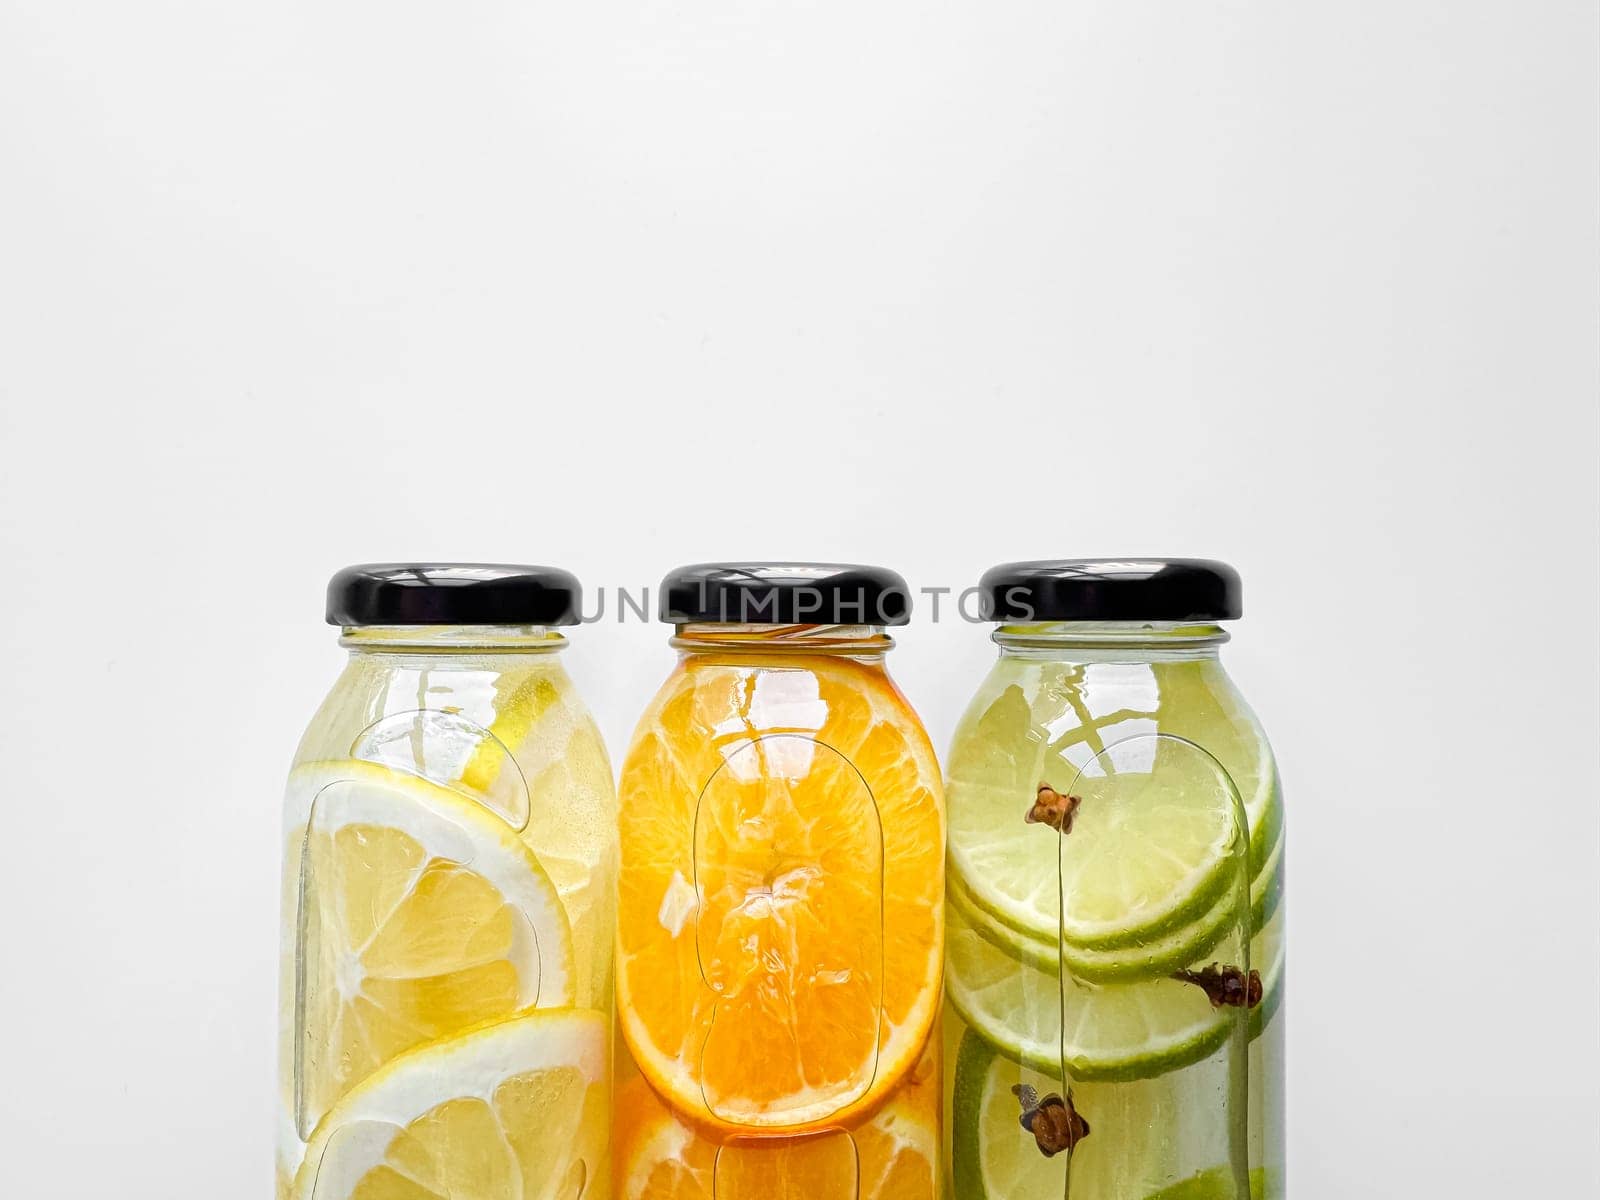 Lemon, orange, and lime detox drinks in glass bottles on white background with copy space. Concept for design and print. High quality photo